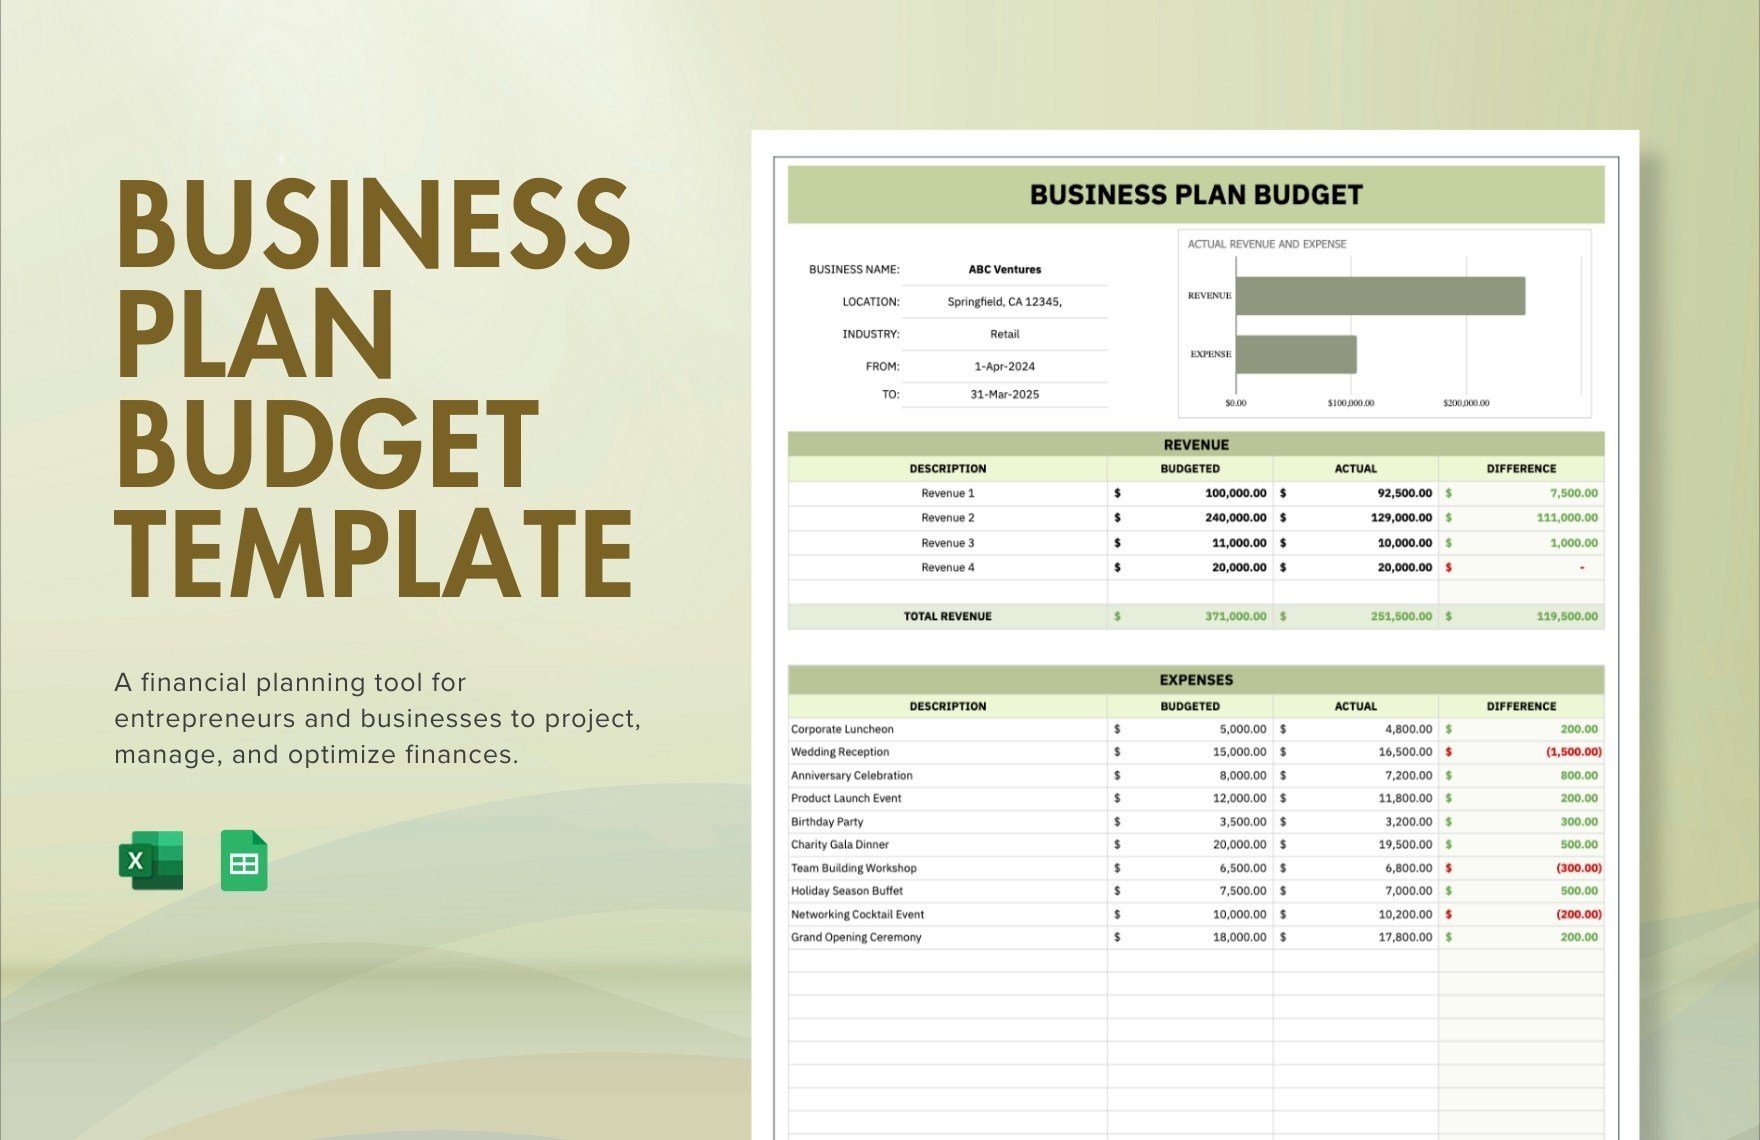 Business Plan Budget Template in Excel, Google Sheets